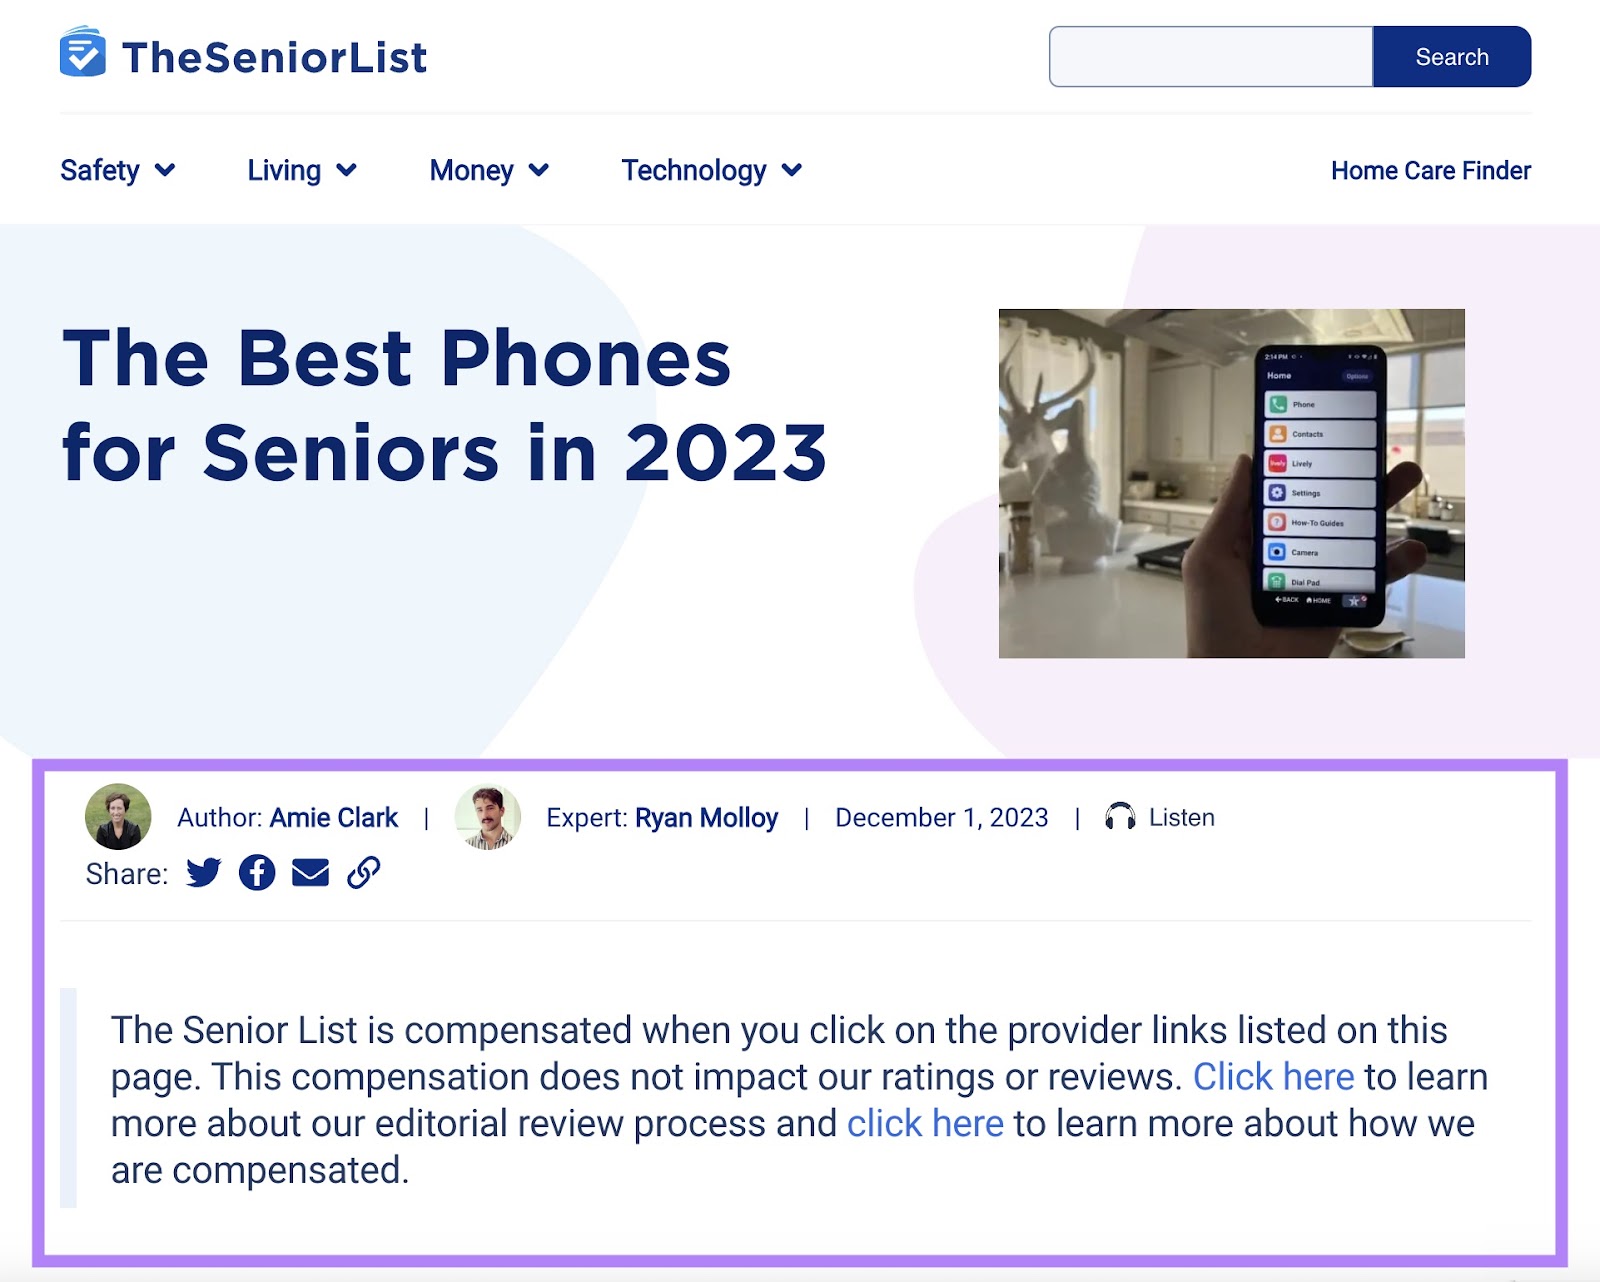 "The Best Phones for Seniors in 2023" page